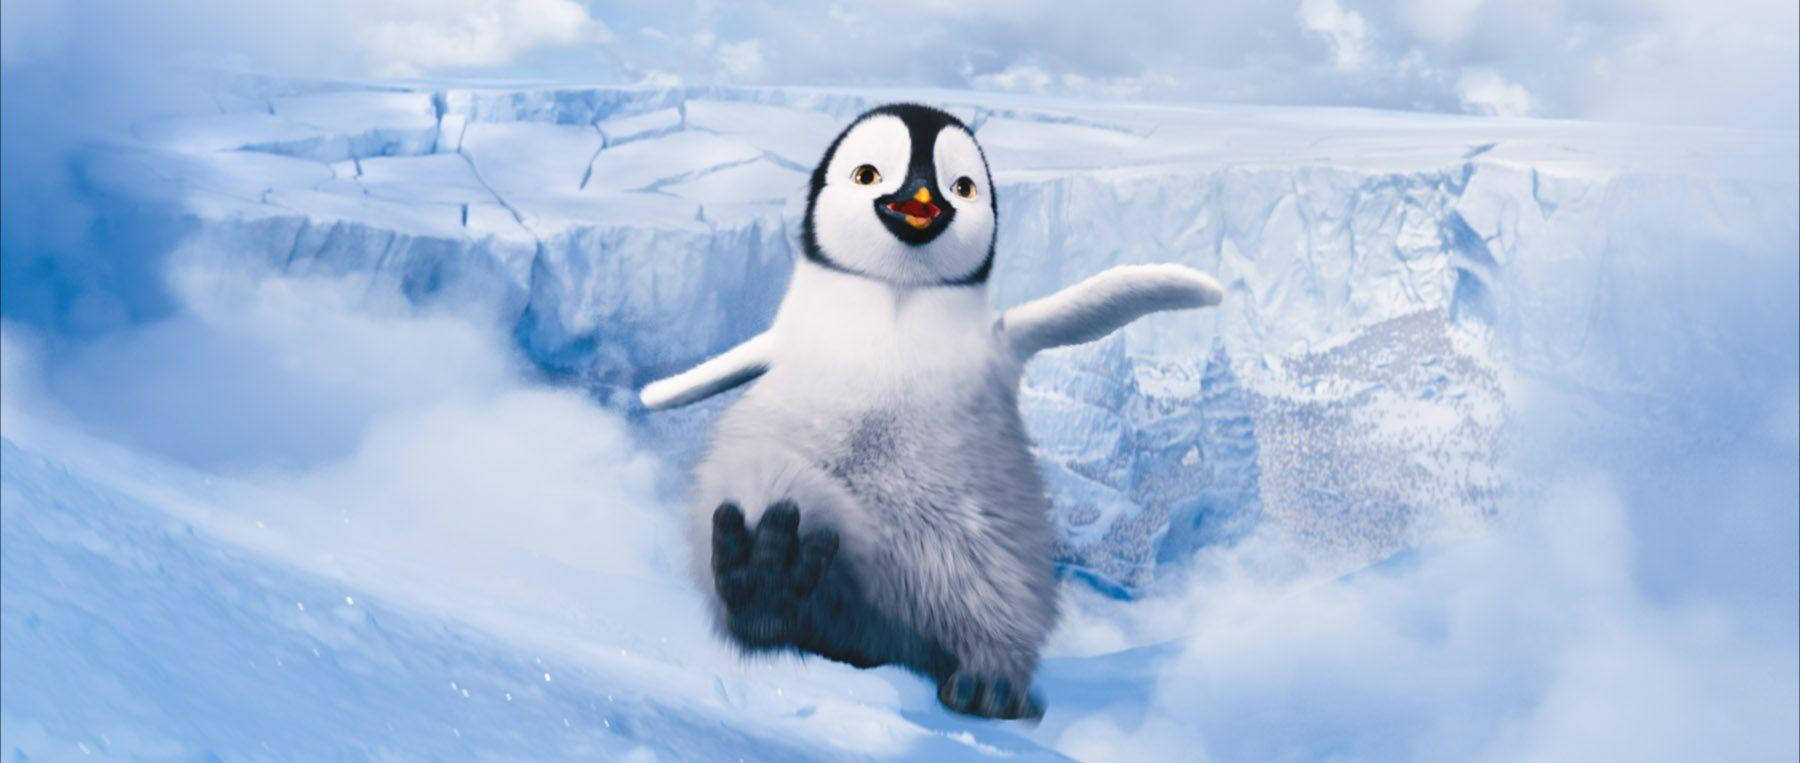 a penguin is running on top of a snowy mountain Wallpaper